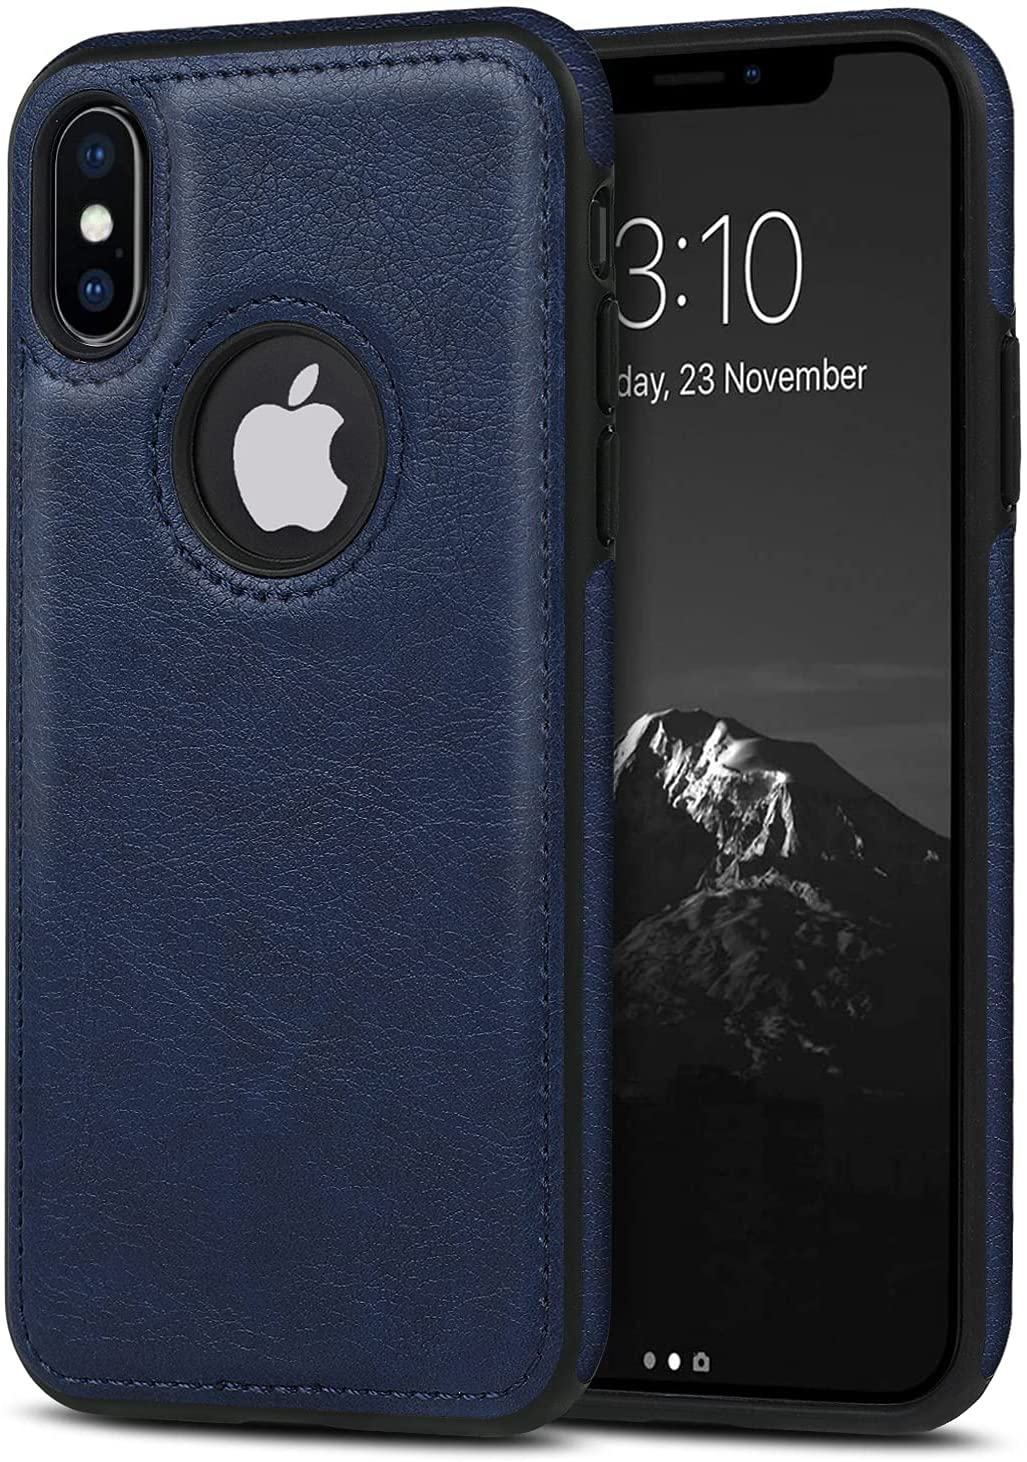 Excelsior Premium PU Leather Back Cover case For Apple iPhone XS Max